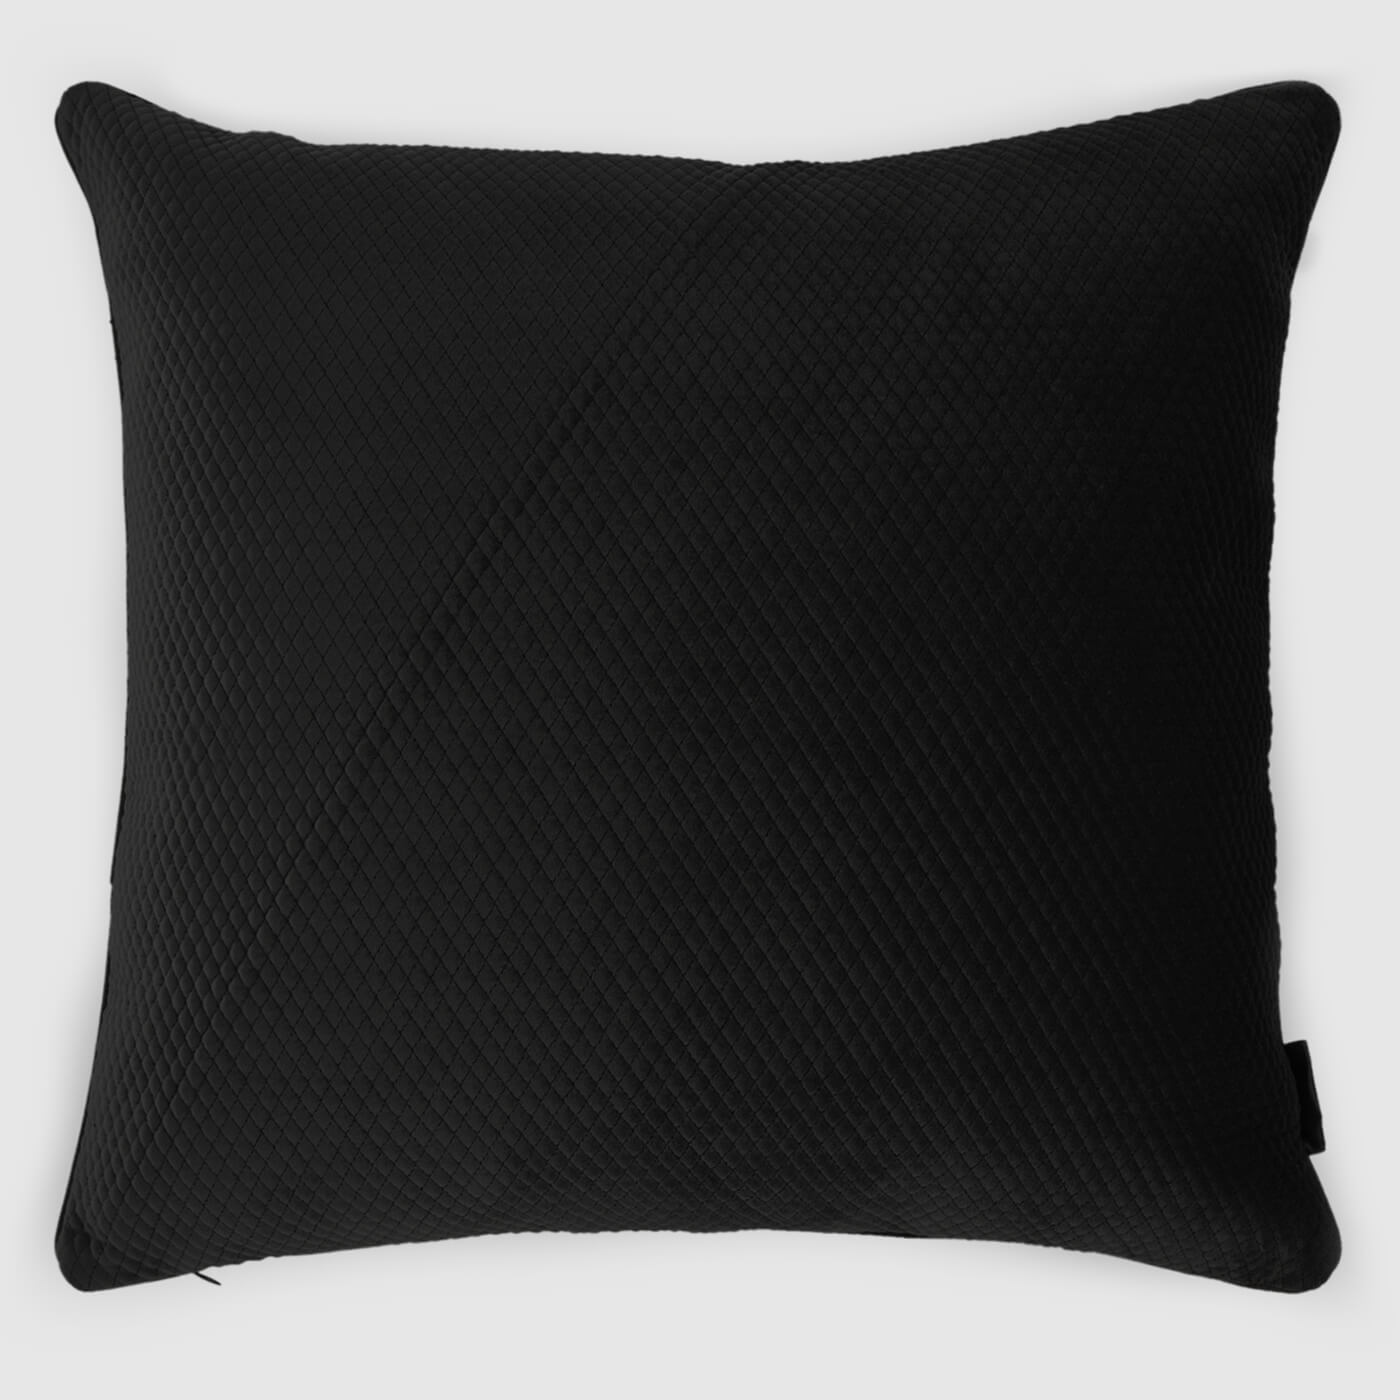 Ashton Classic Quilted Pillow Cover , Black - Pillow Covers